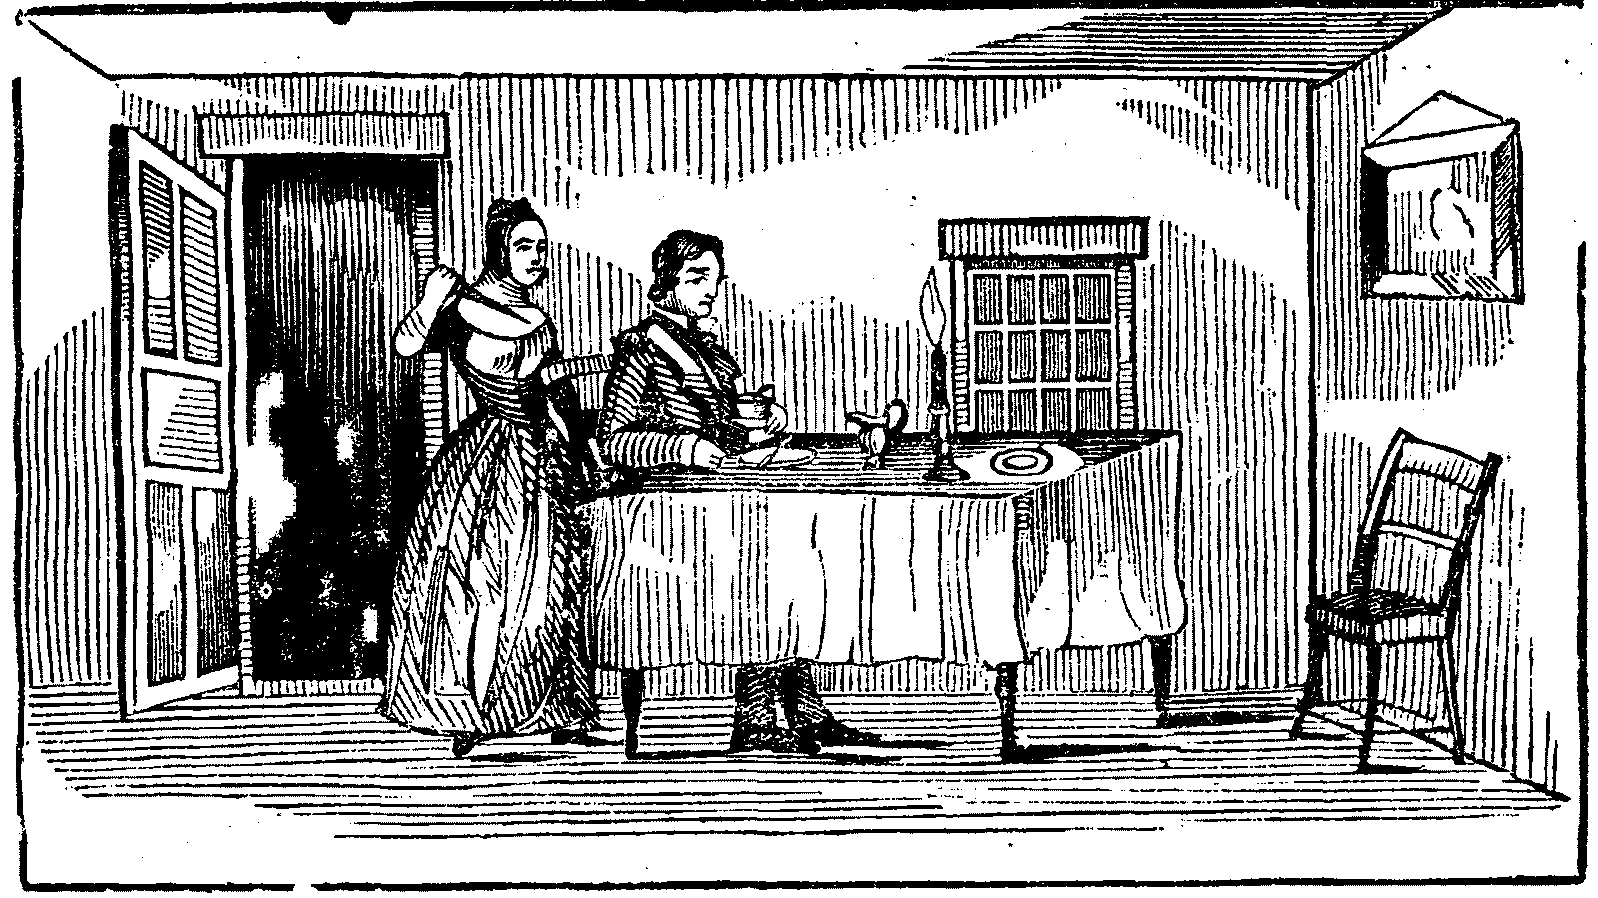 Ann stands behind a guest, seated at a table, with a knife in her raised hand.